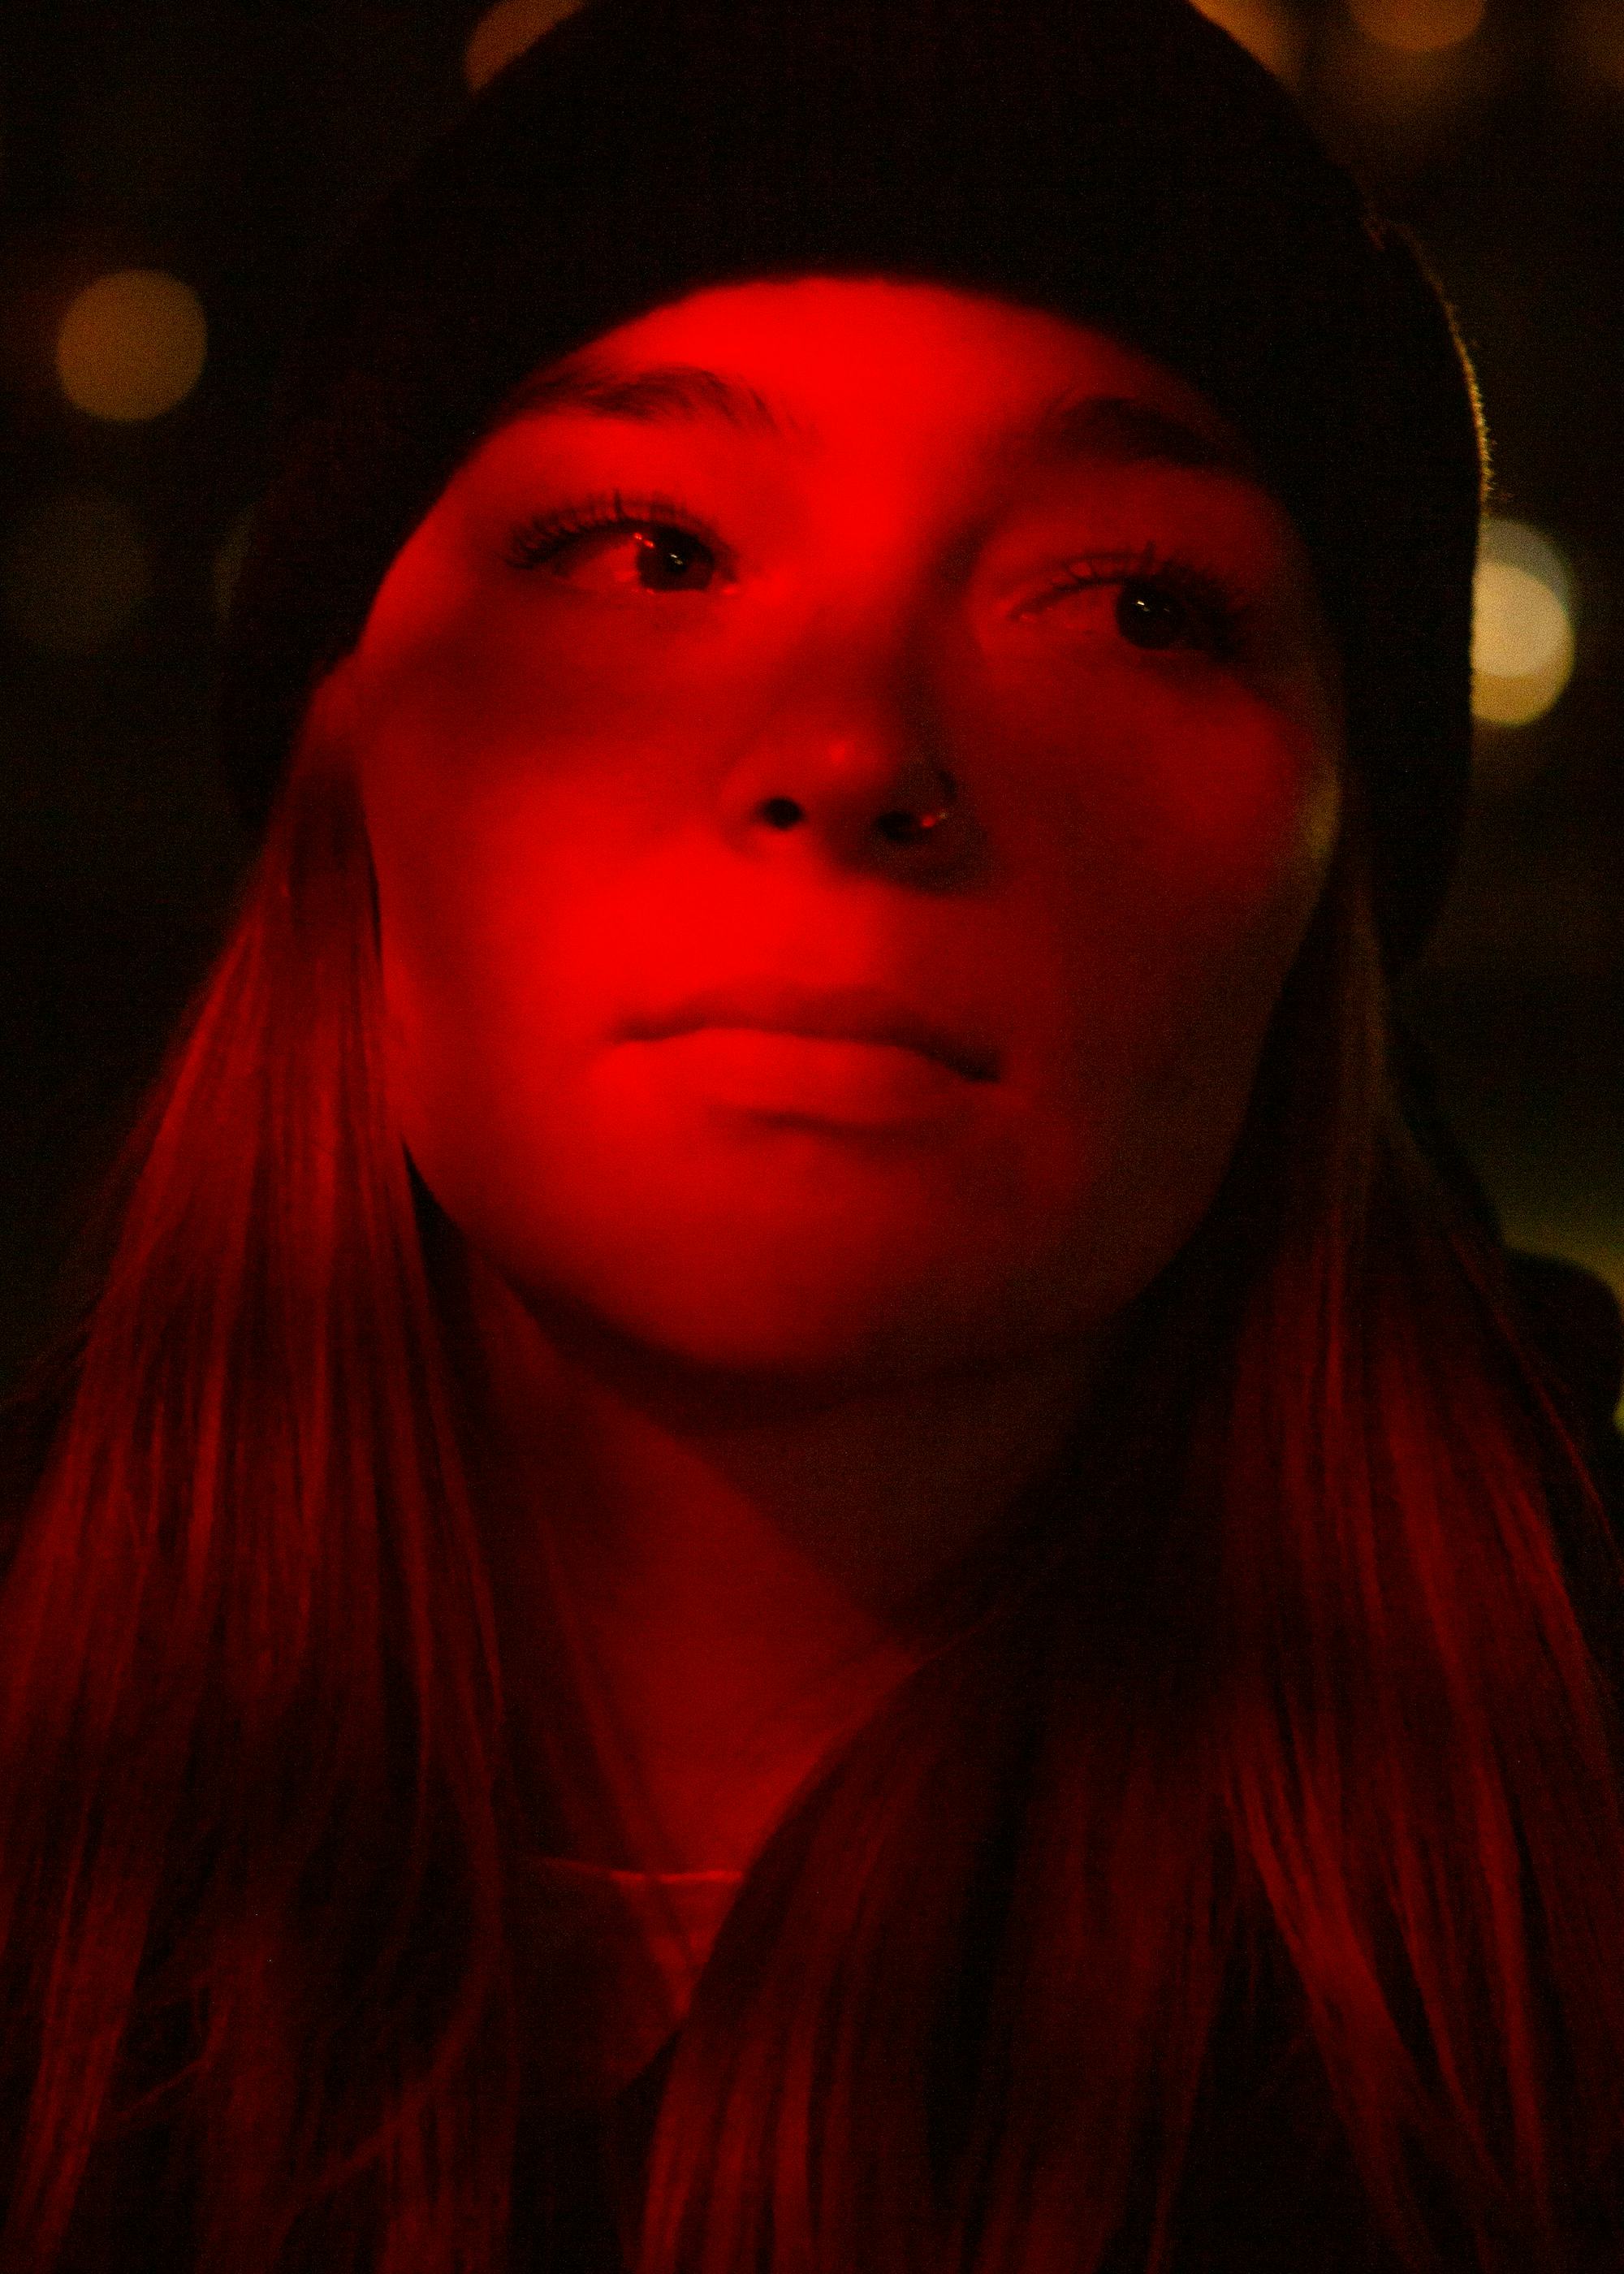 portrait of a person with a red light over them, looking away from the camera